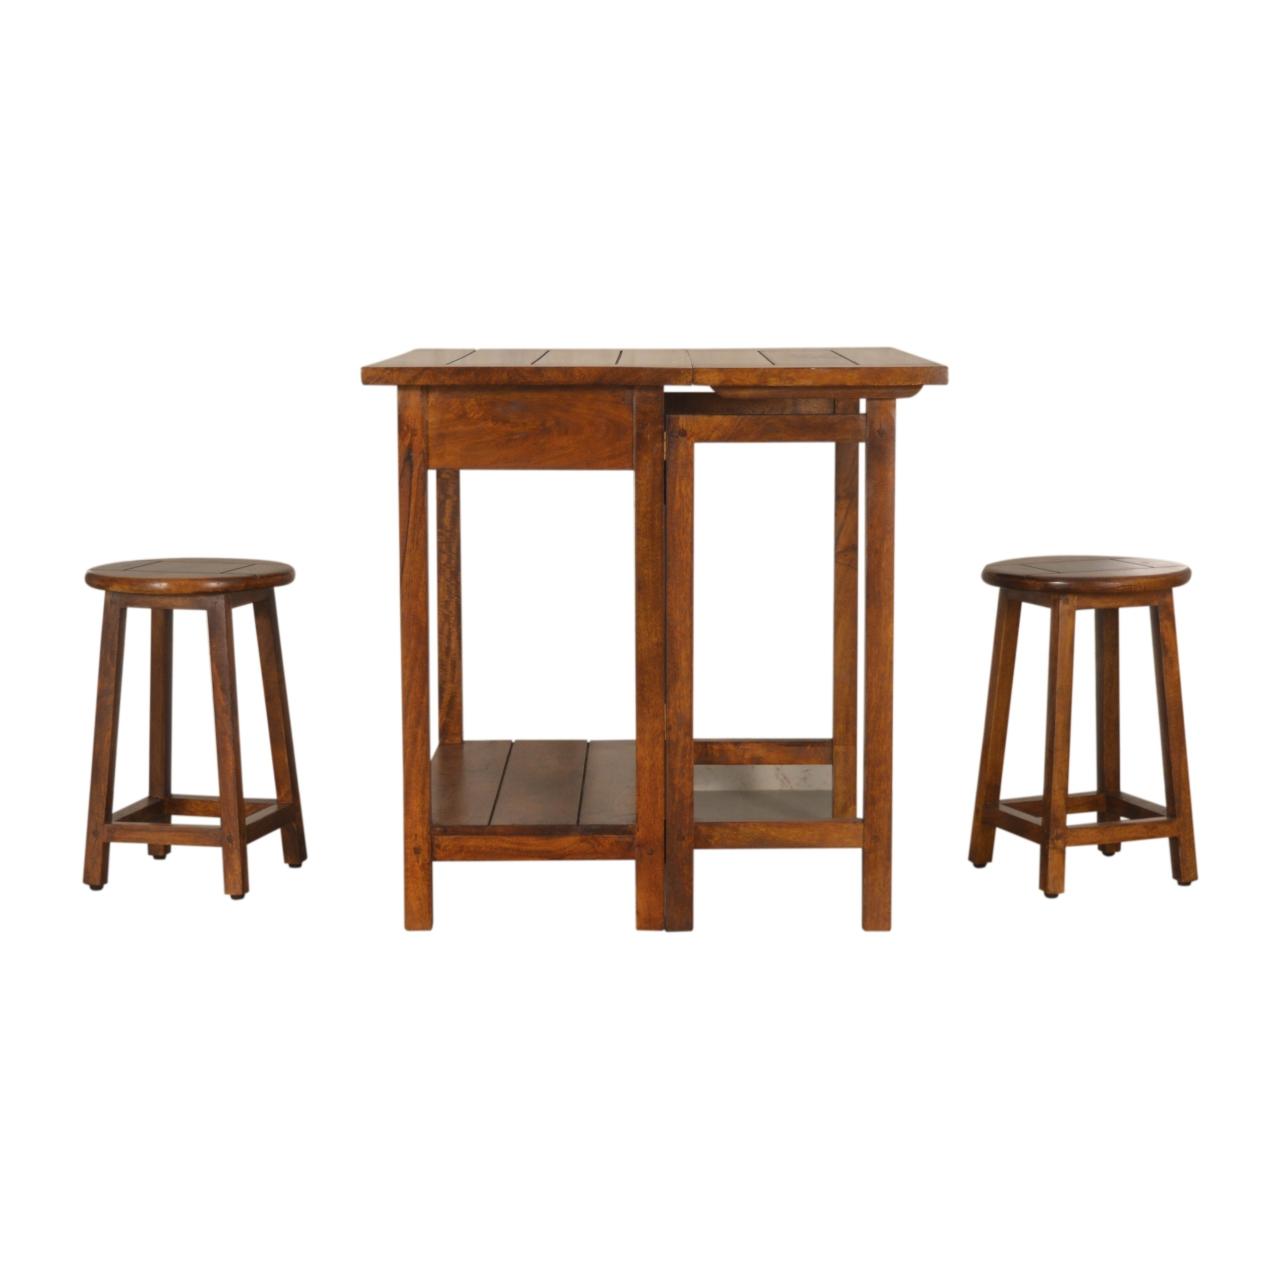 Chestnut Breakfast Table with 2 Stools